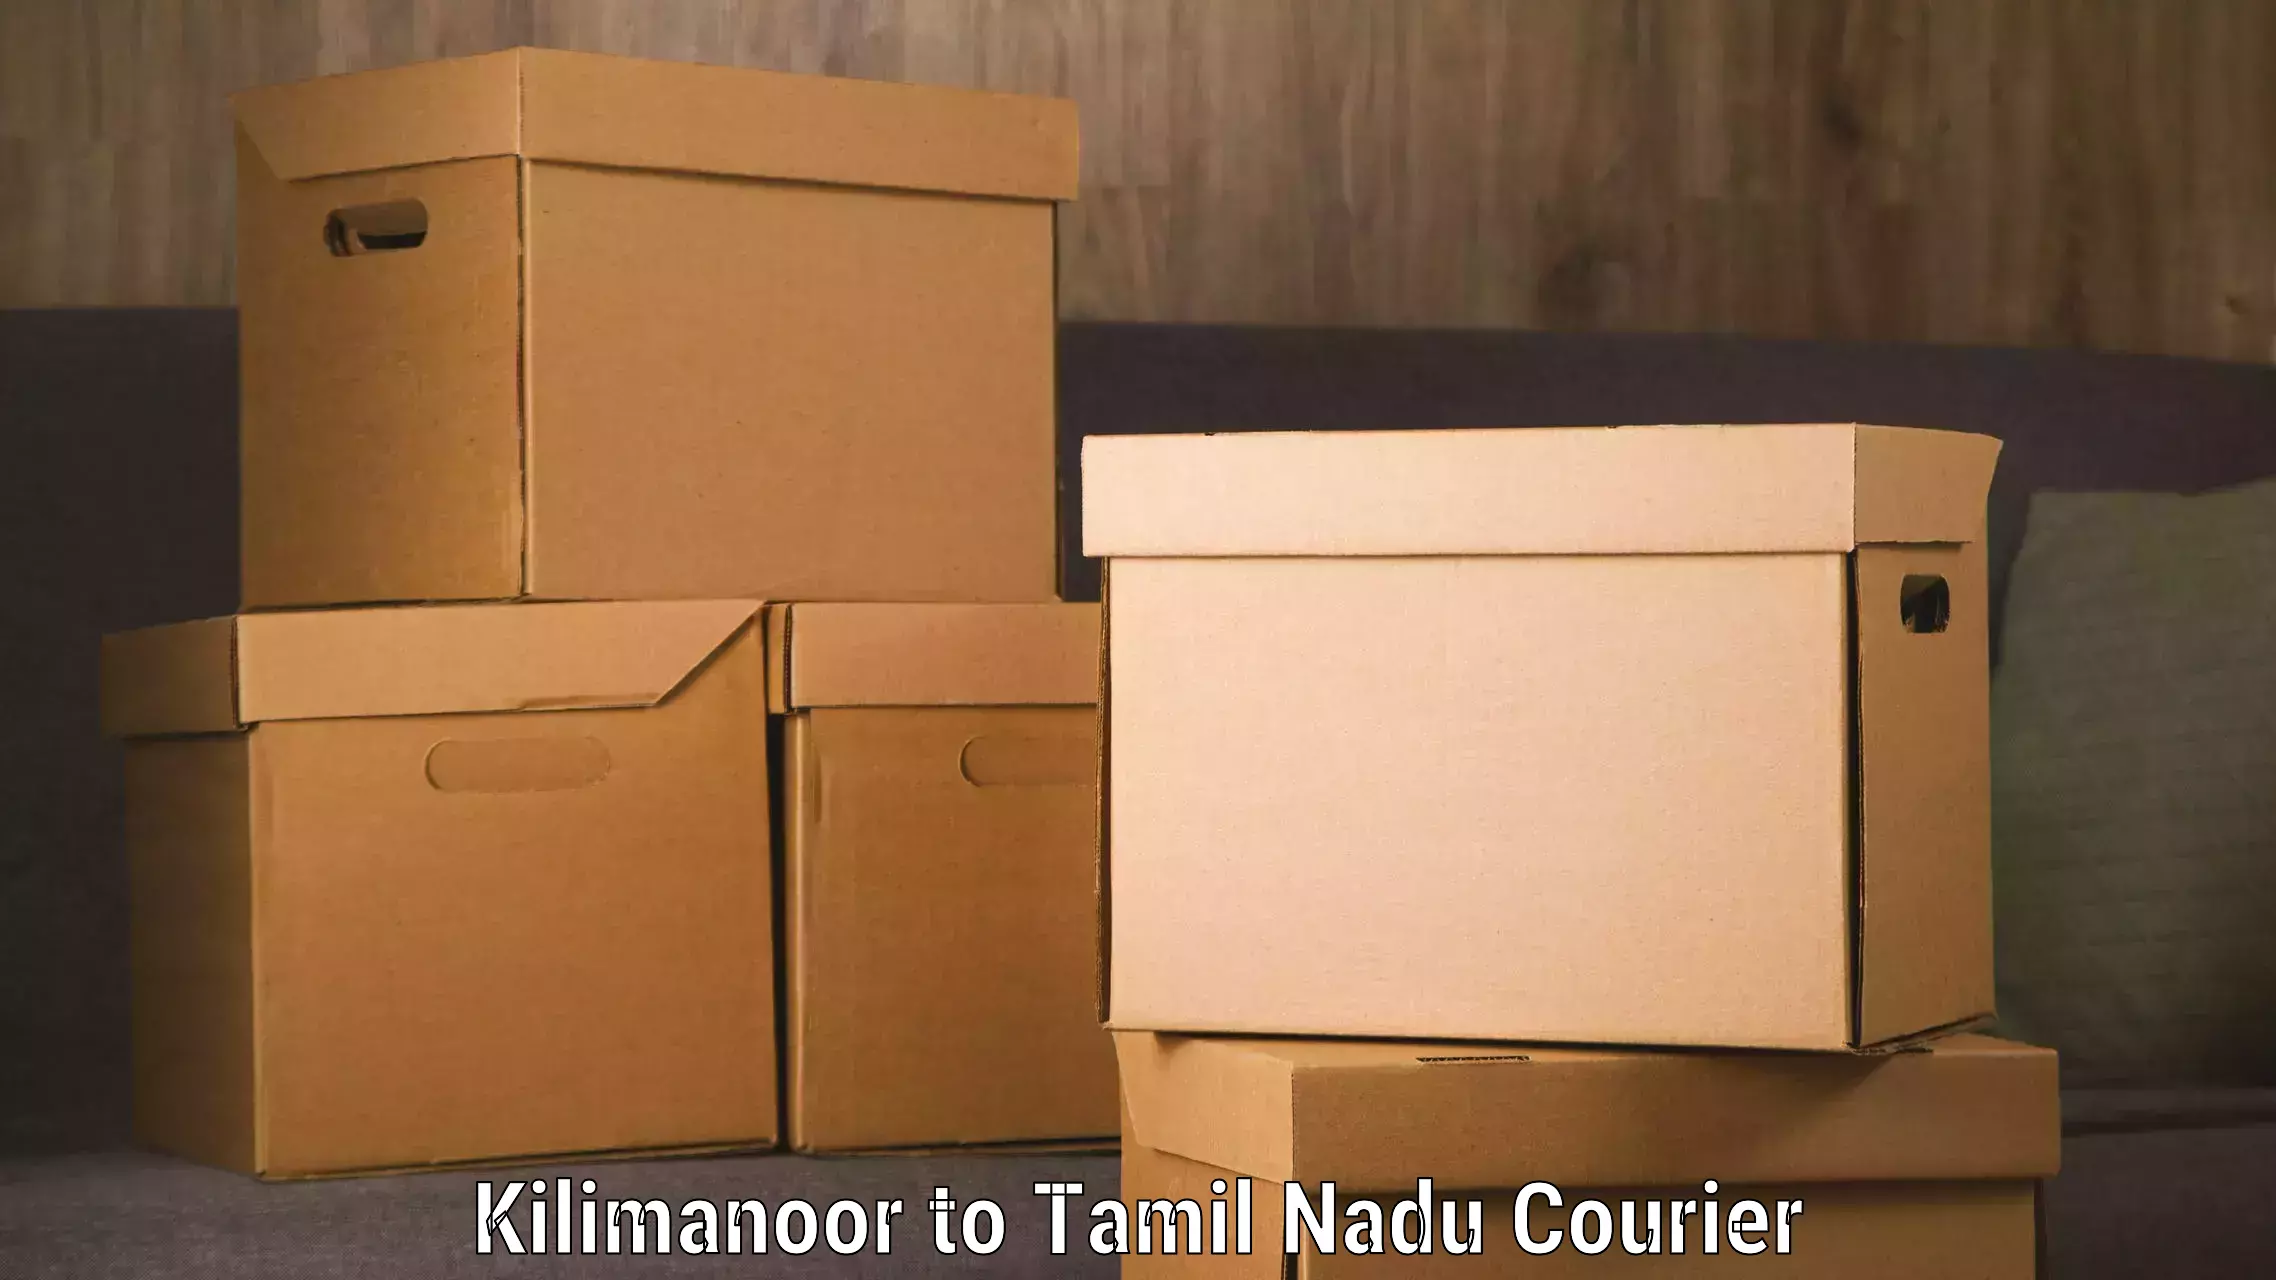 Courier service partnerships Kilimanoor to Chennai Port